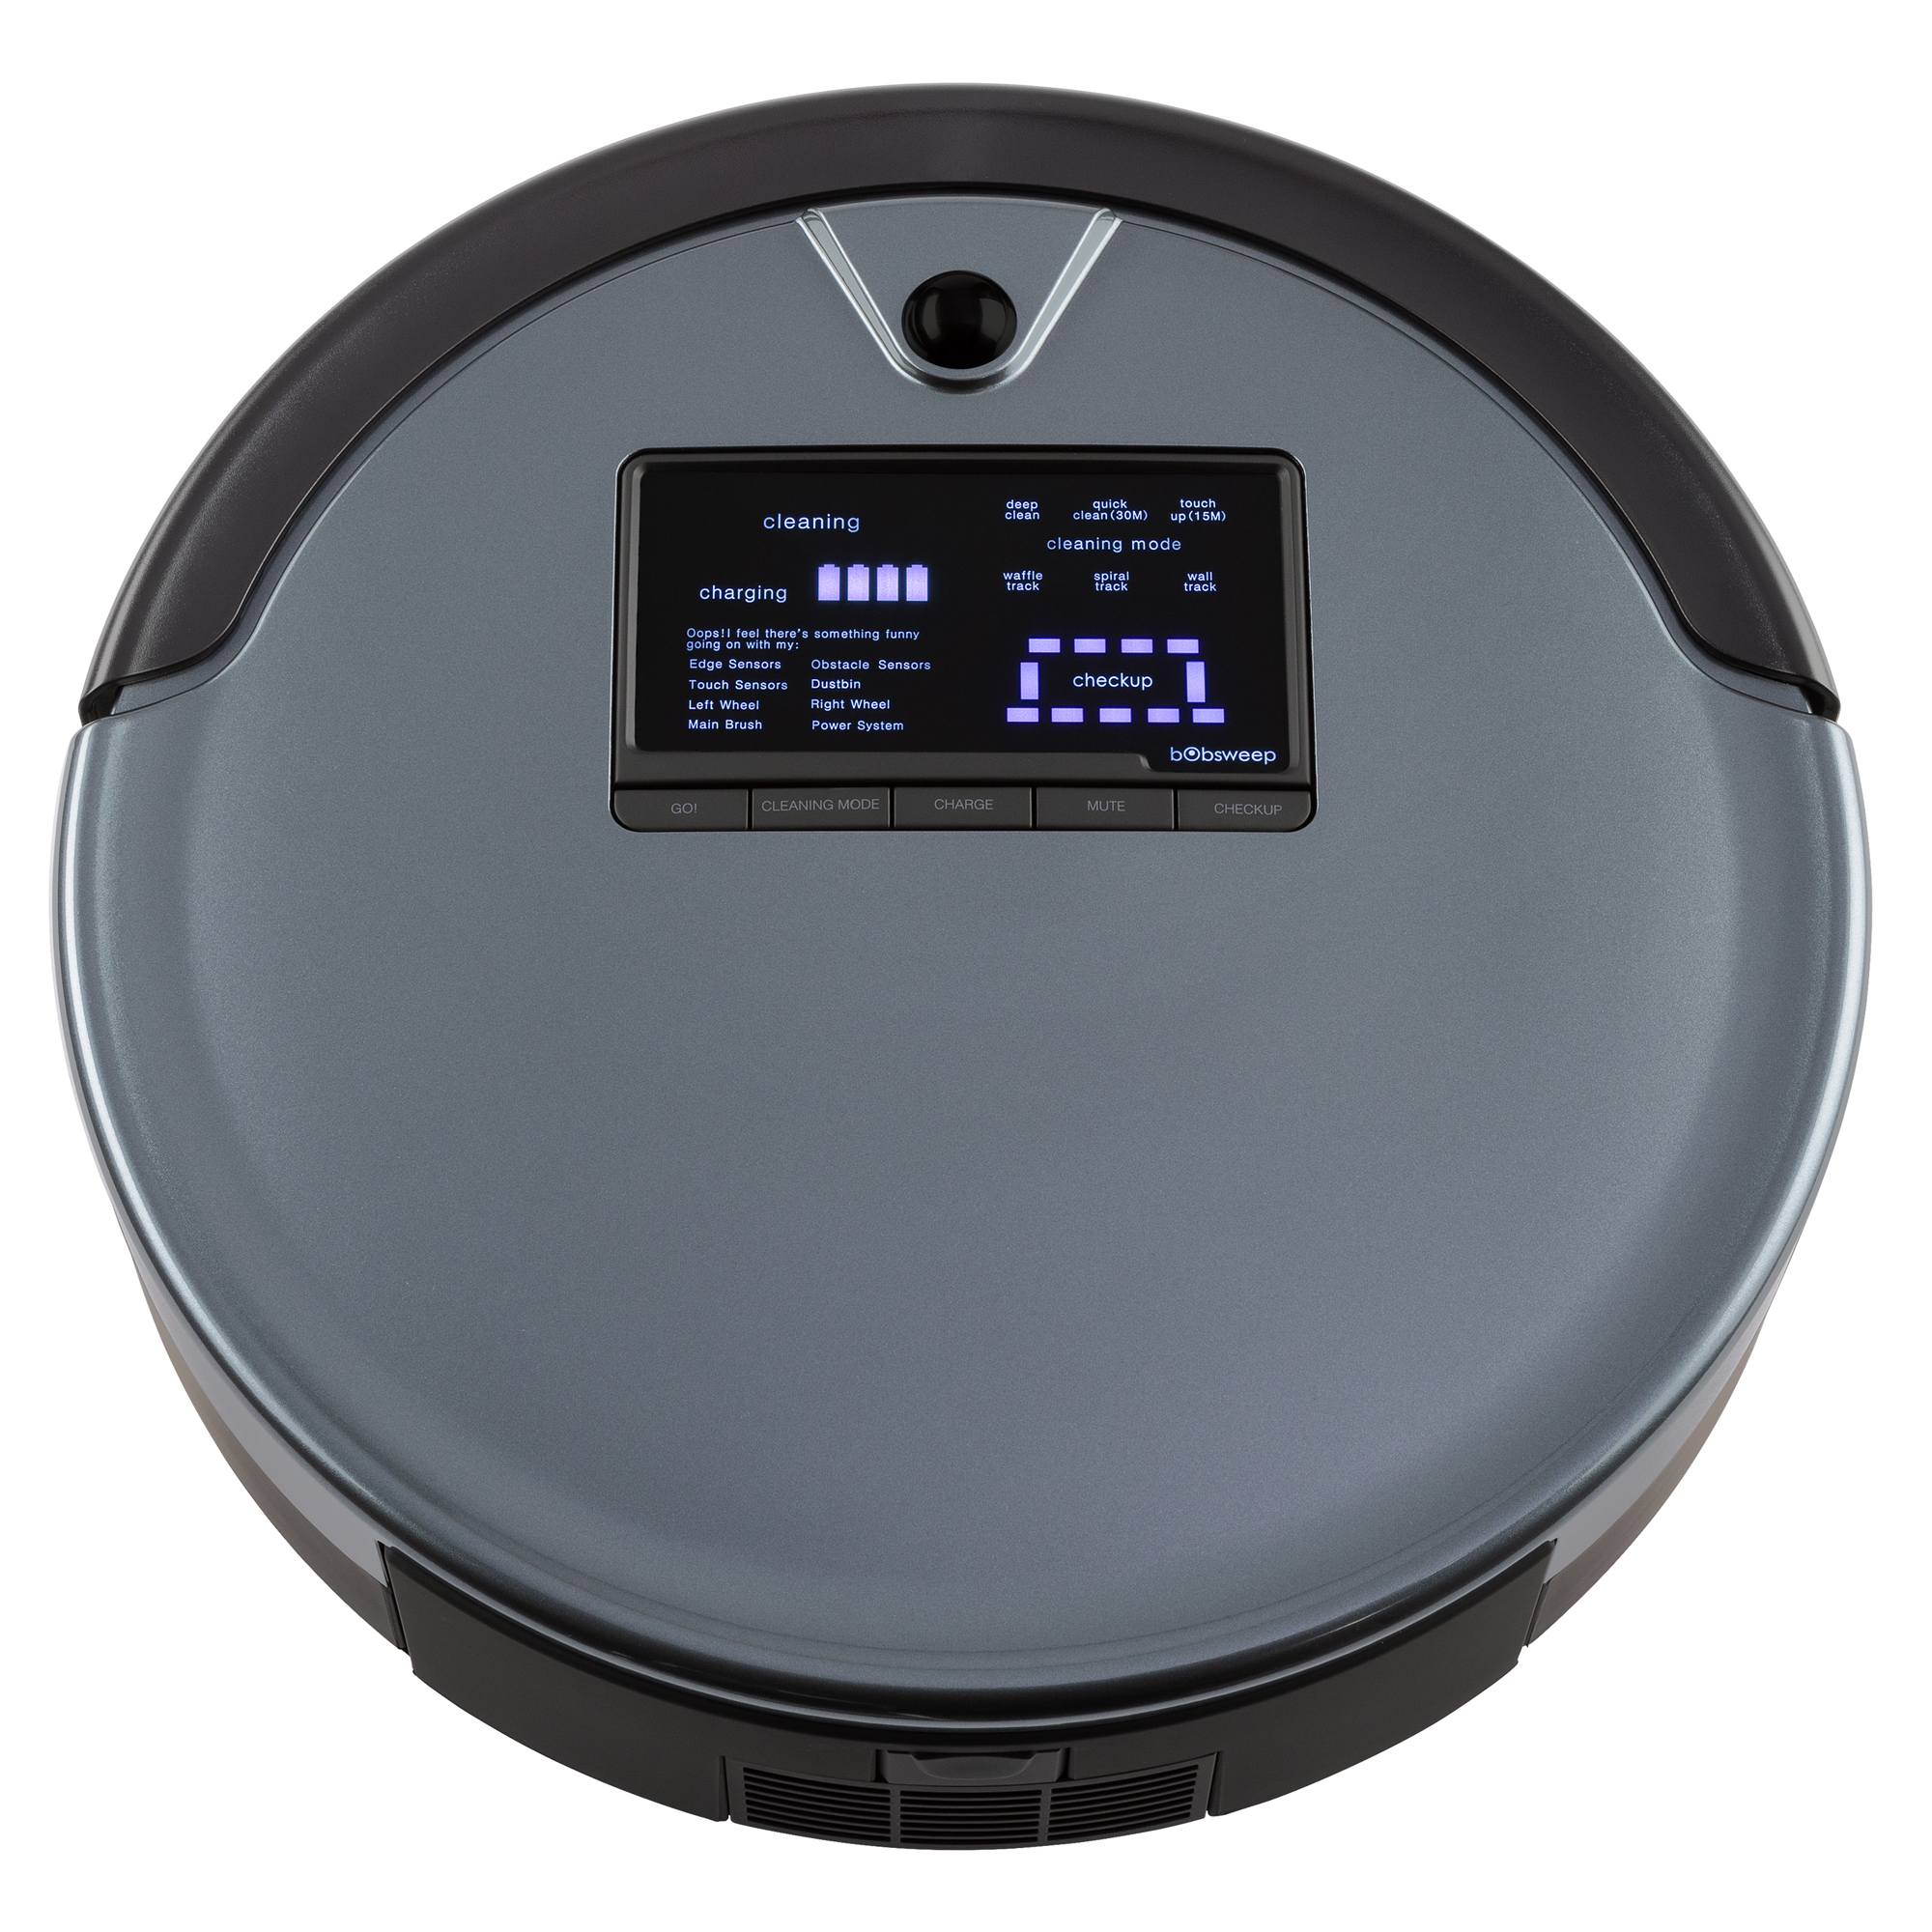 Bobsweep Pet Hair Plus Robotic Vacuum Cleaner and Mop, Charcoal - image 3 of 8